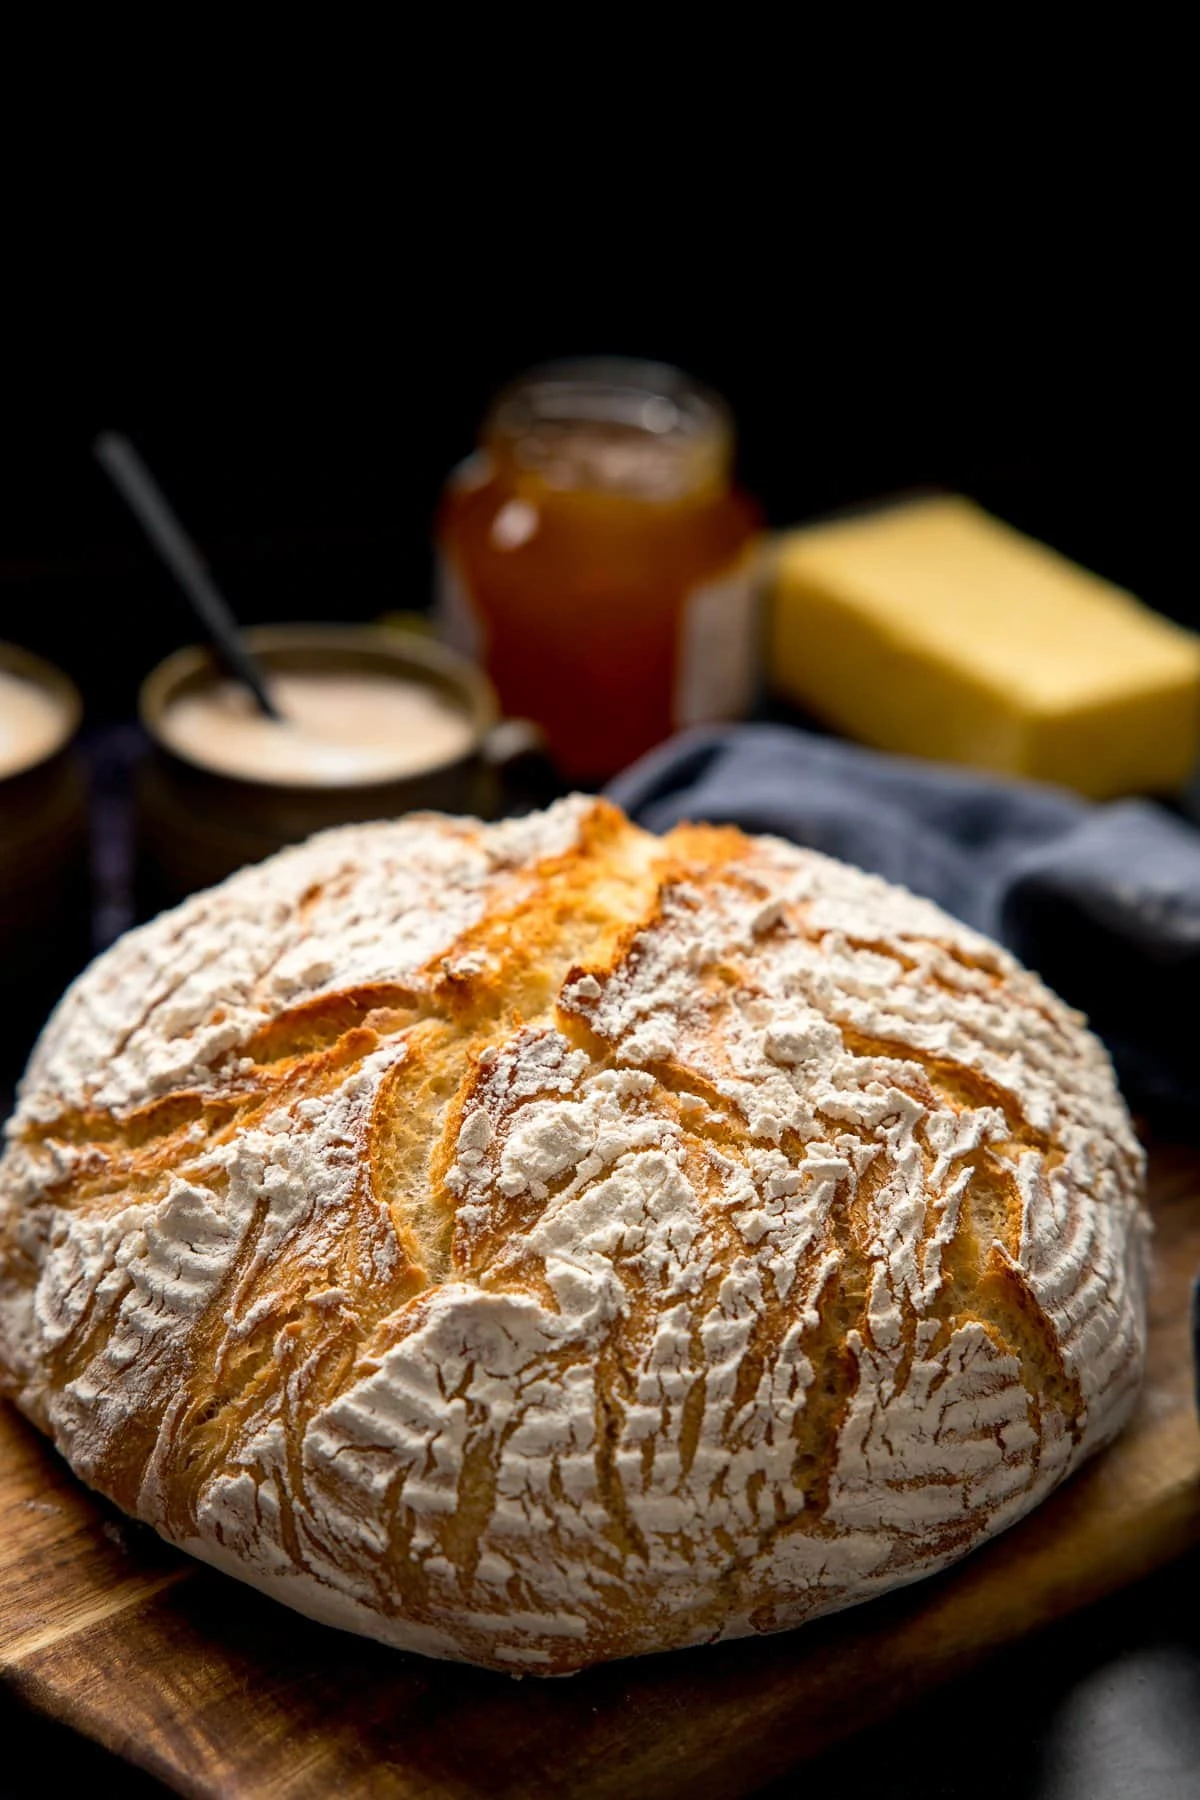 Artisan bread on a wooden board against a dark background